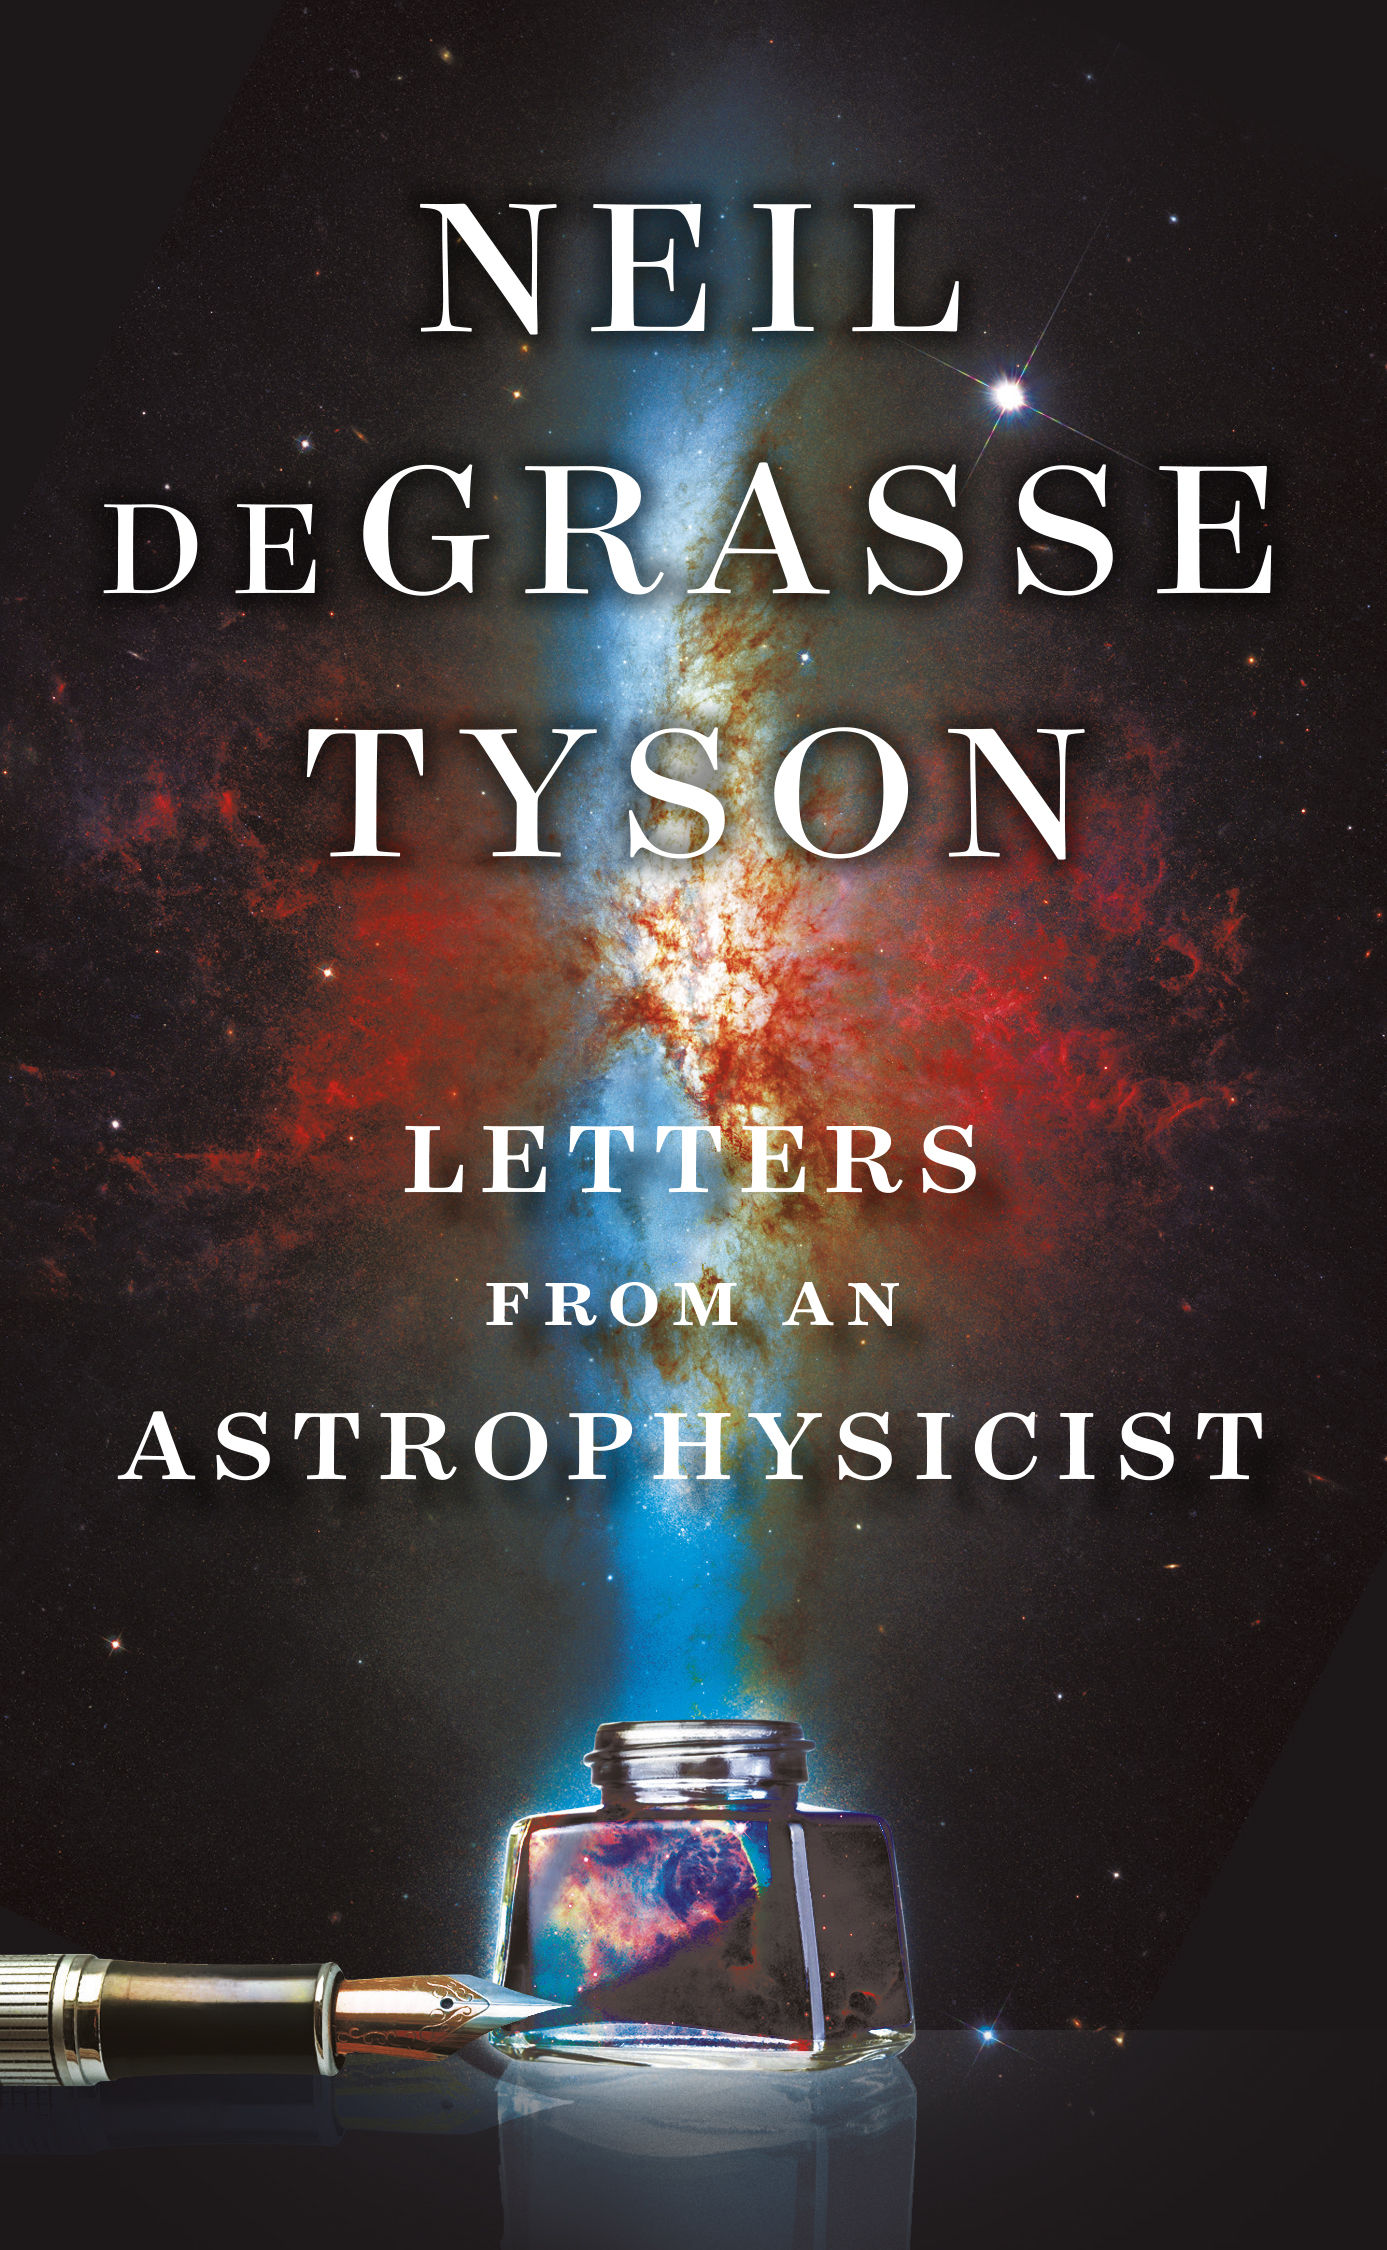 Link to the book Letters from an Astrophysicist by Neil deGrasse Tyson.